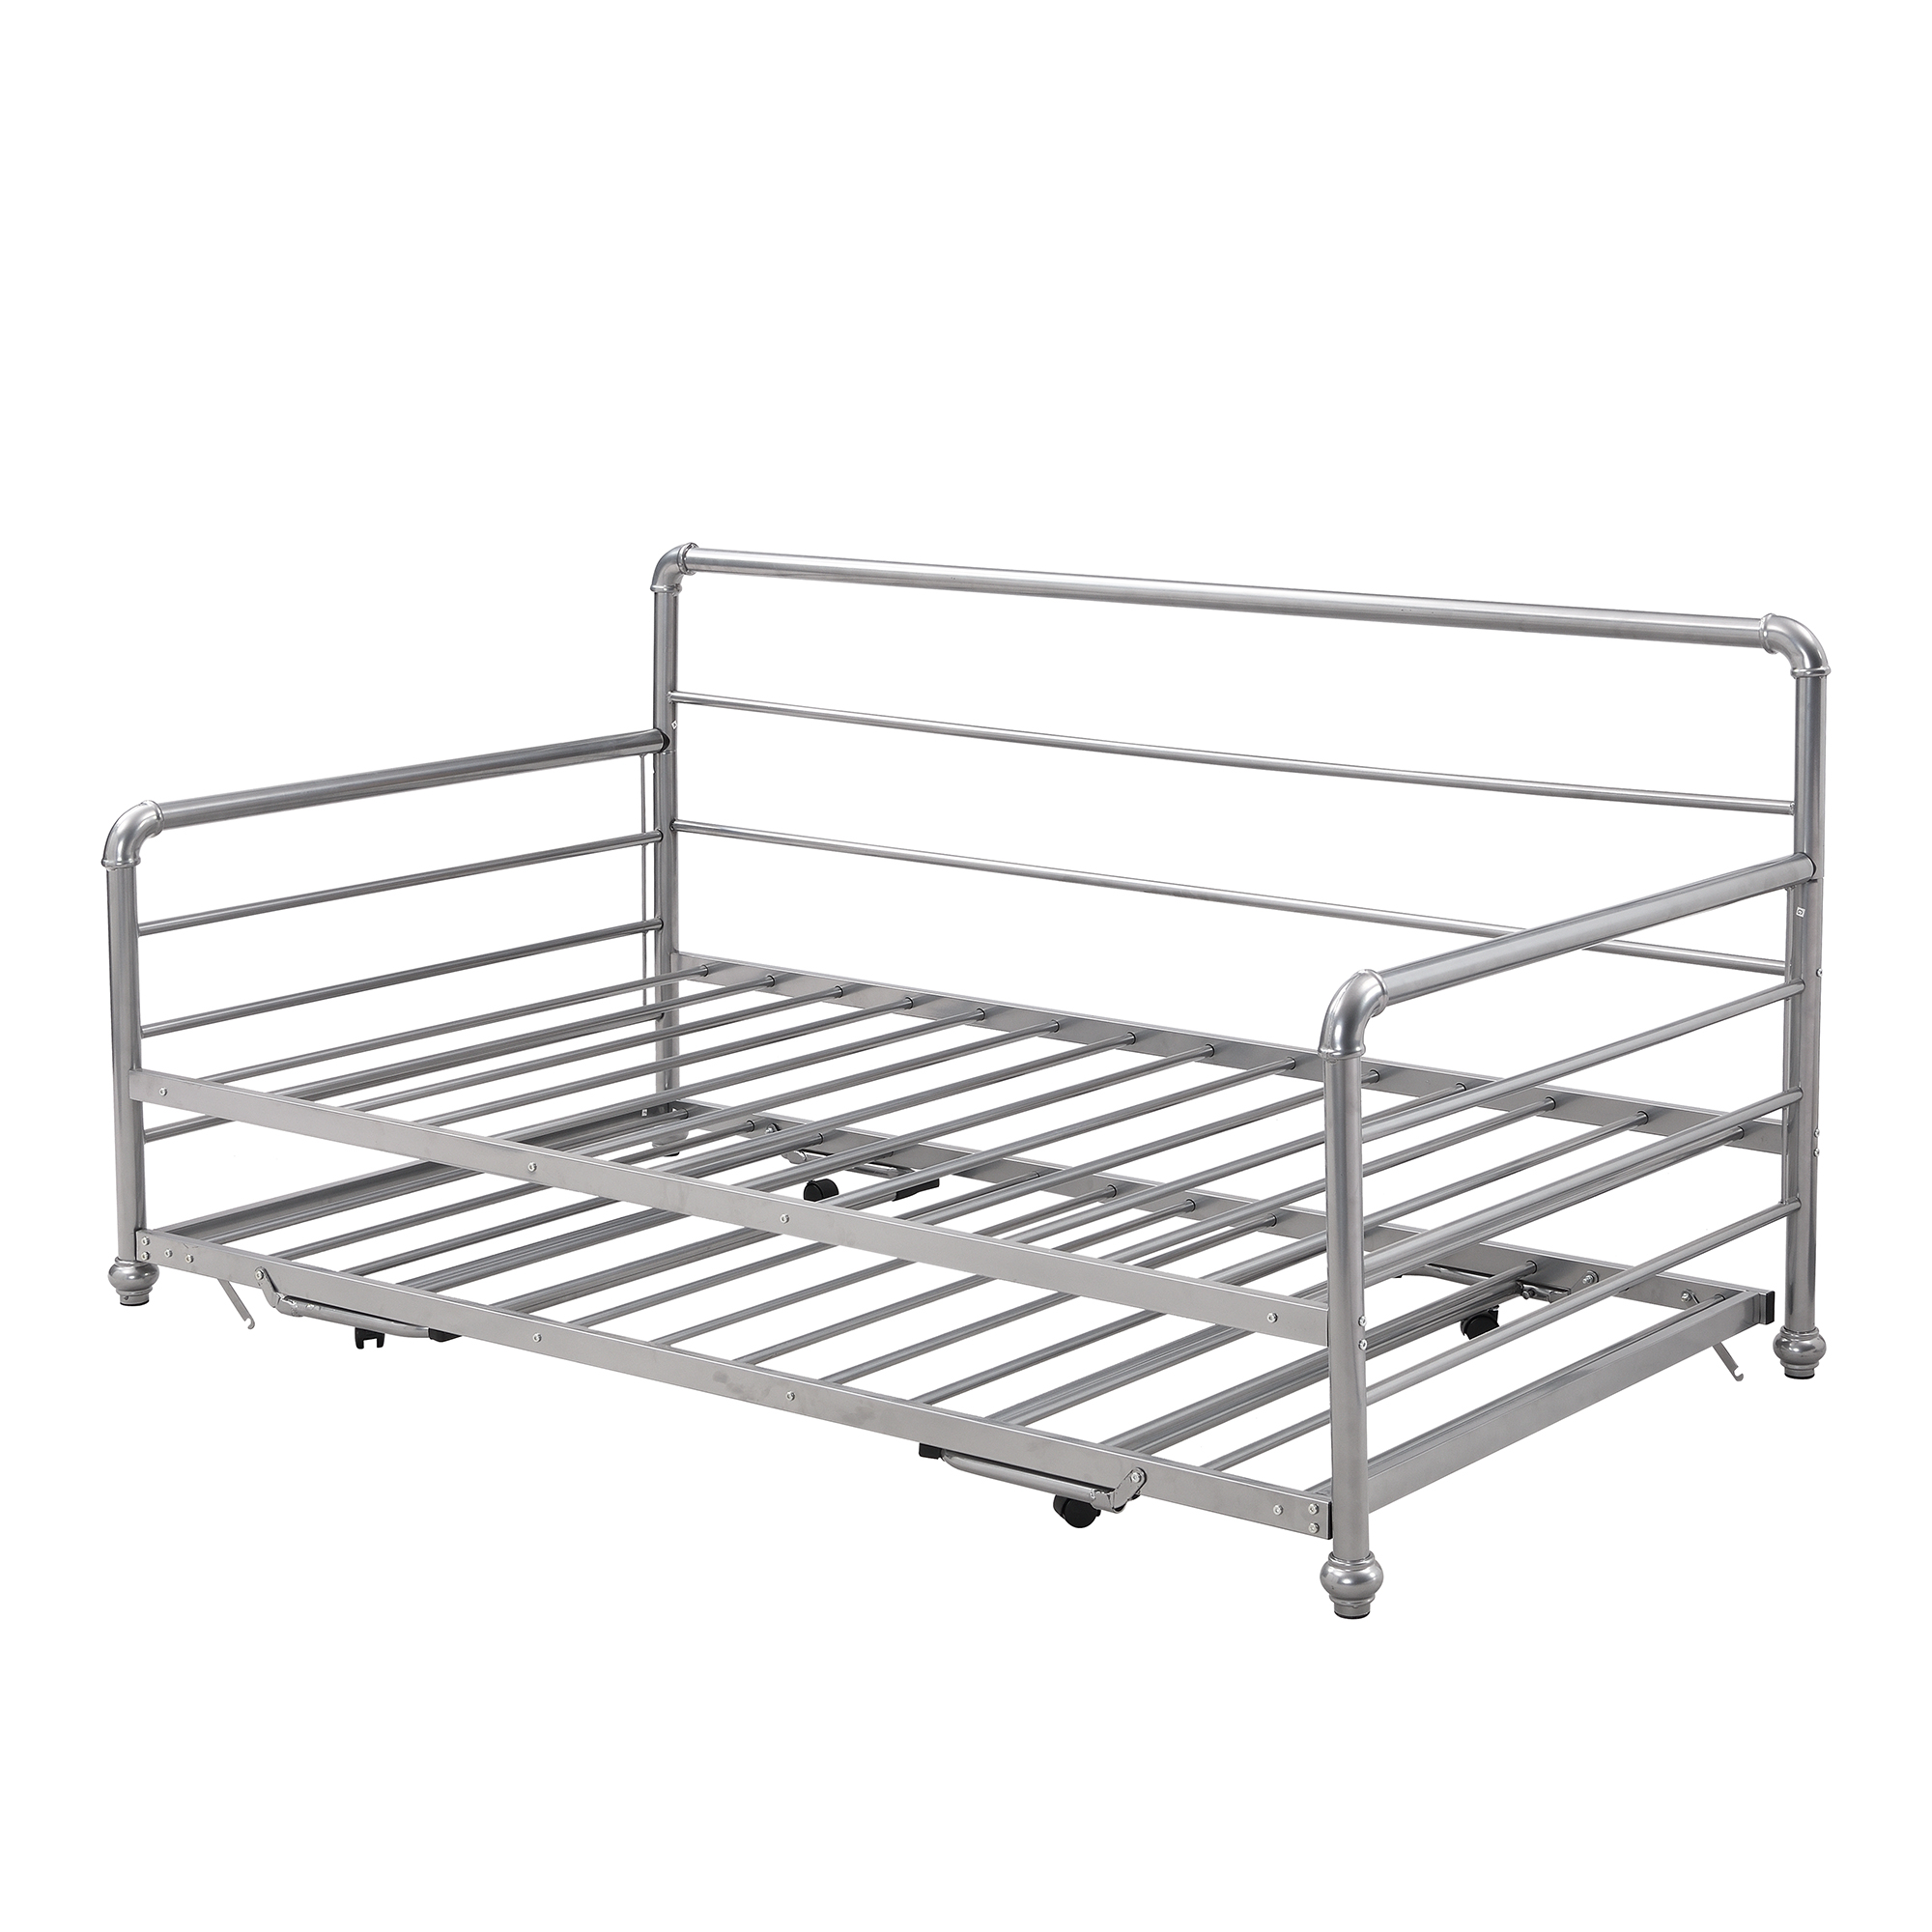 Kacho Twin Size Daybed with Adjustable Trundle, Pop Up Trundle, Heavy-Duty Steel Daybed for Bedroom Living Room, for Boys Girls Adults, Space Saving No Box Spring Need, Silver - image 5 of 7